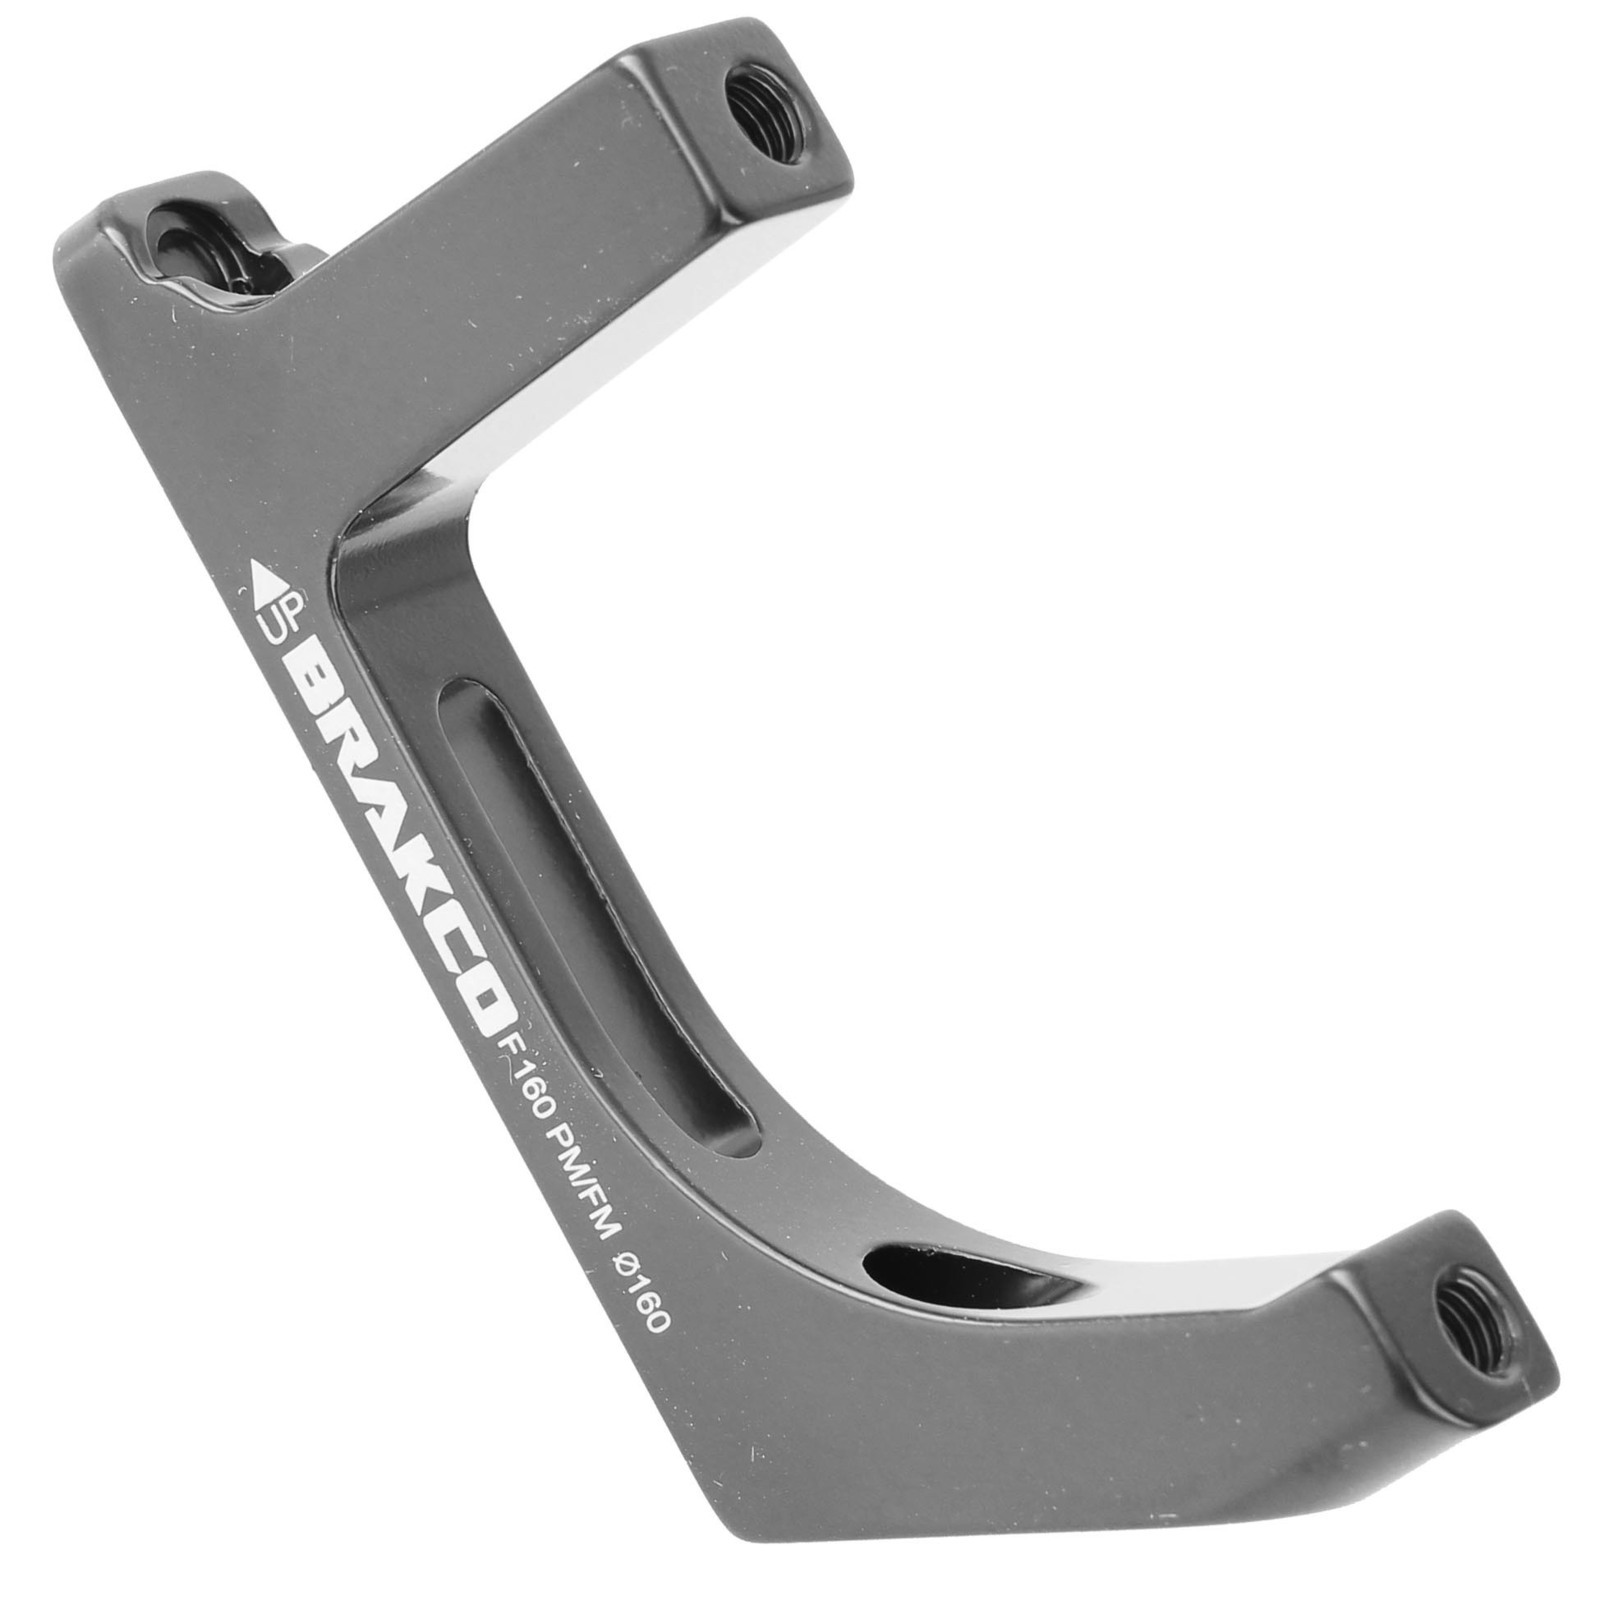 SELCOF AD160F FRONT BRAKE DISC ADAPTER IS POST MOUNT 160mm SUIT AVID,MAGURA,FORMULA 